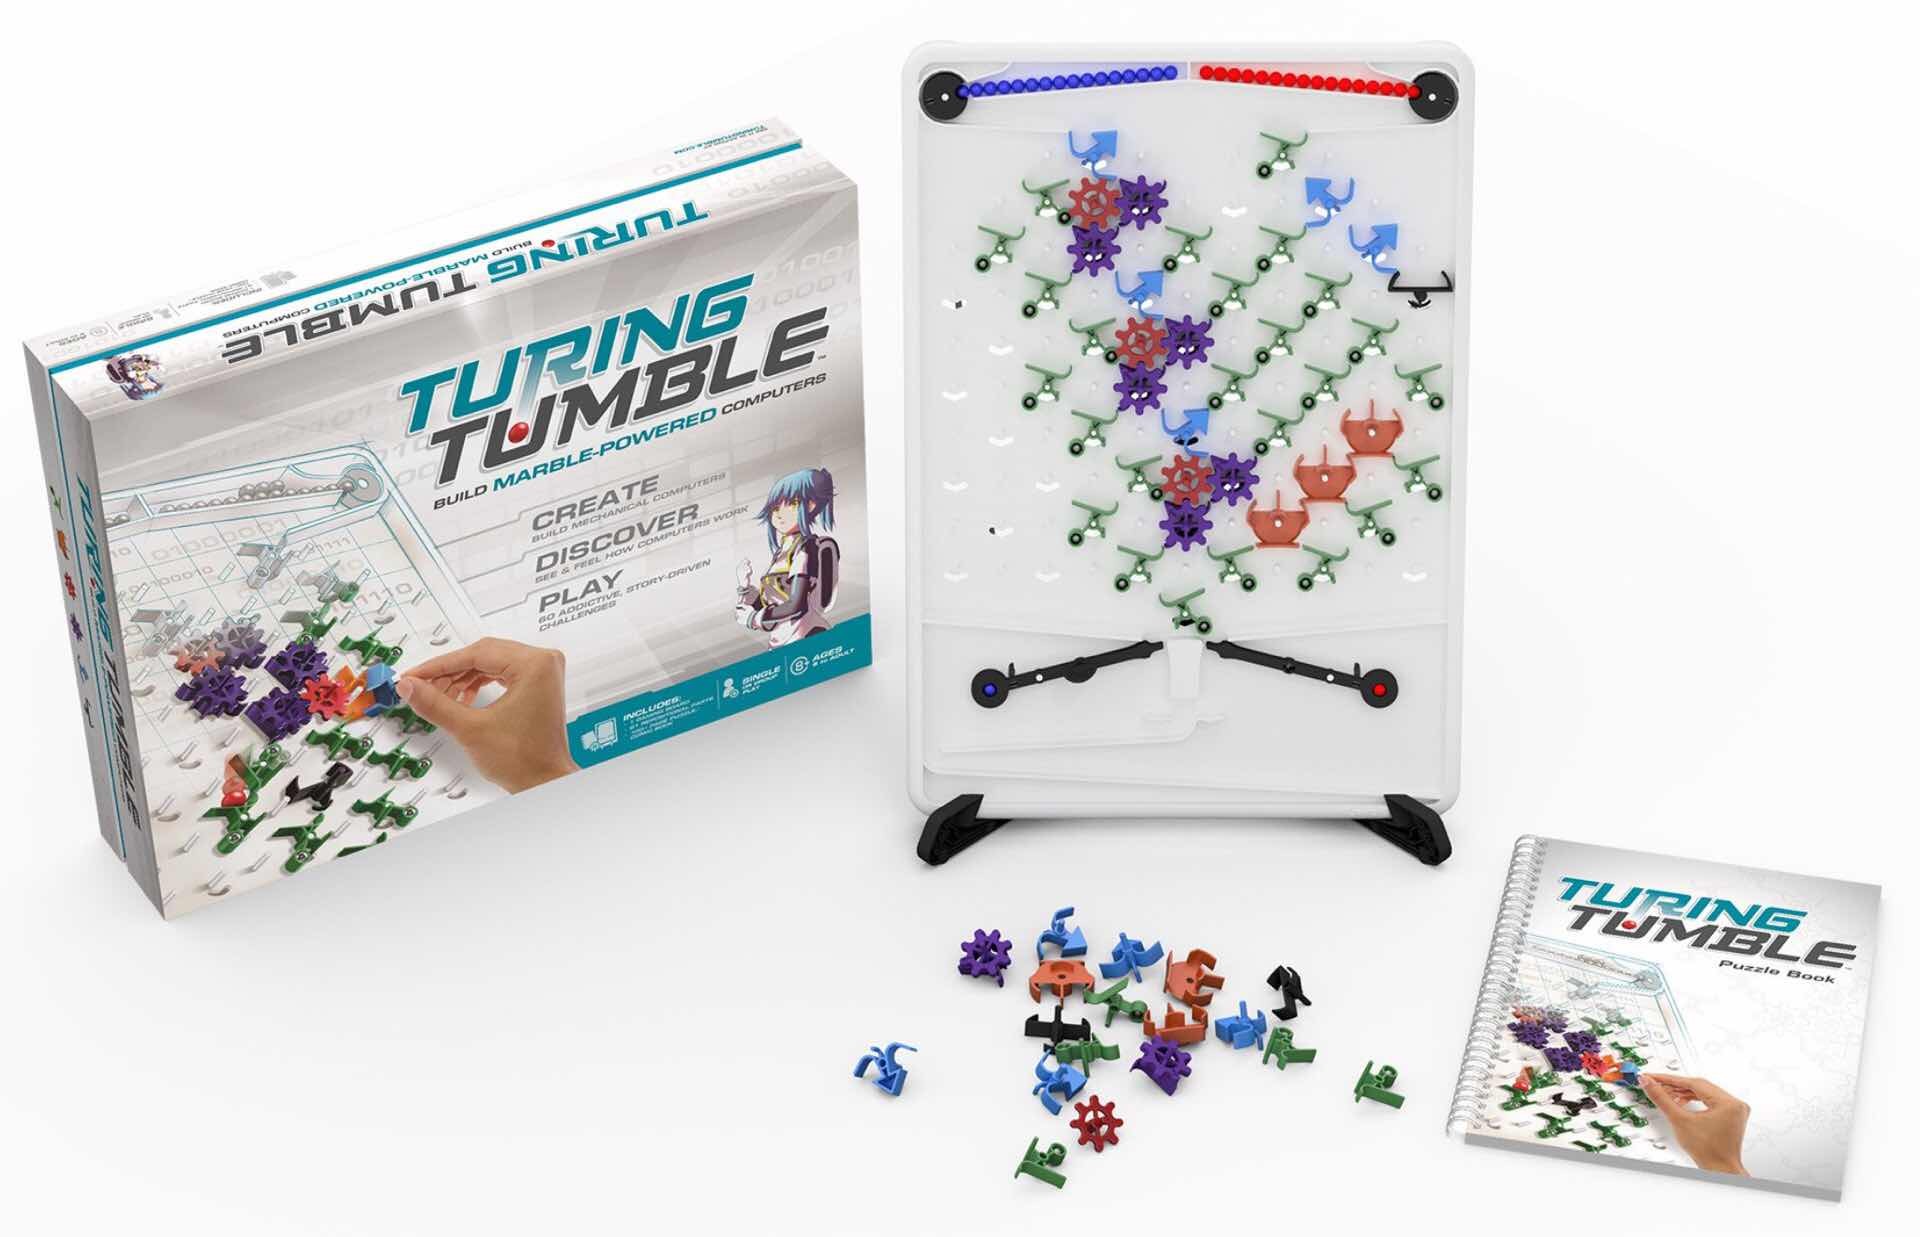 Turing Tumble ($70 for the standard kit; as of this writing, the game is still unavailable on Amazon)